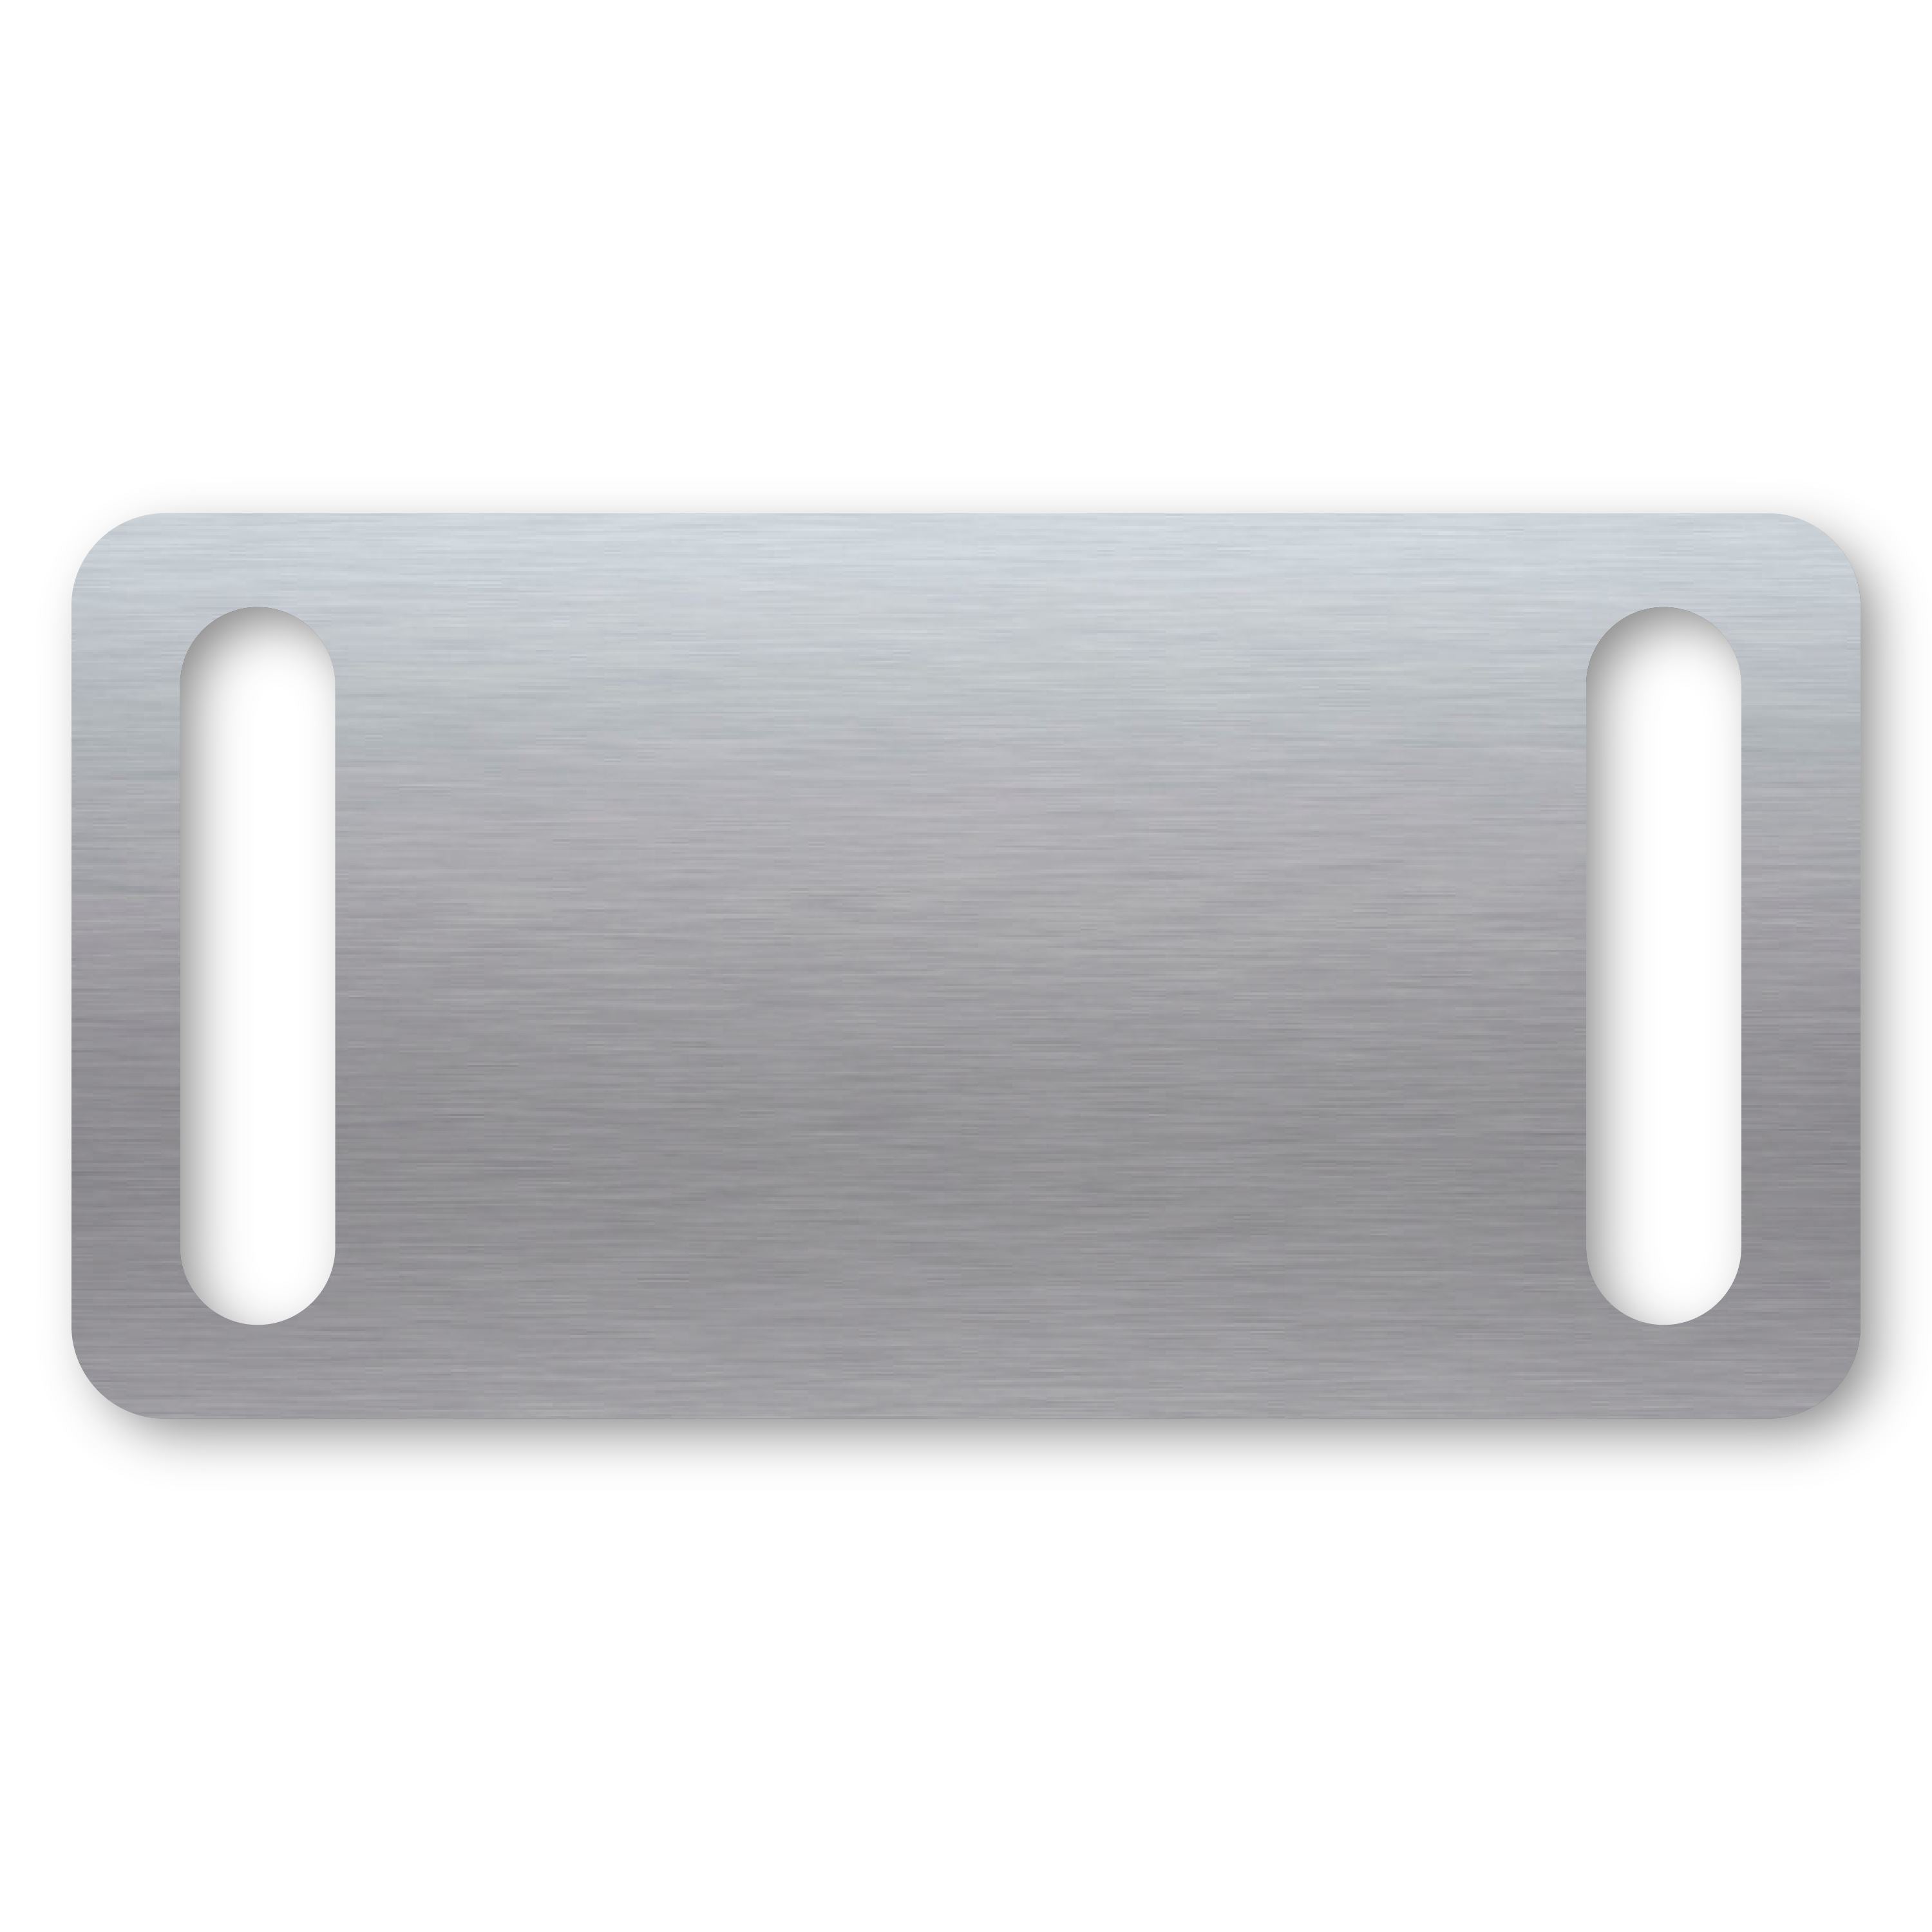 Anodized Aluminum Rectangle Slide-On Tags, 1-3/16" x 2" with 1/4" x 1" Slot, Laser Engraved Metal Tags Craftworks NW Silver 